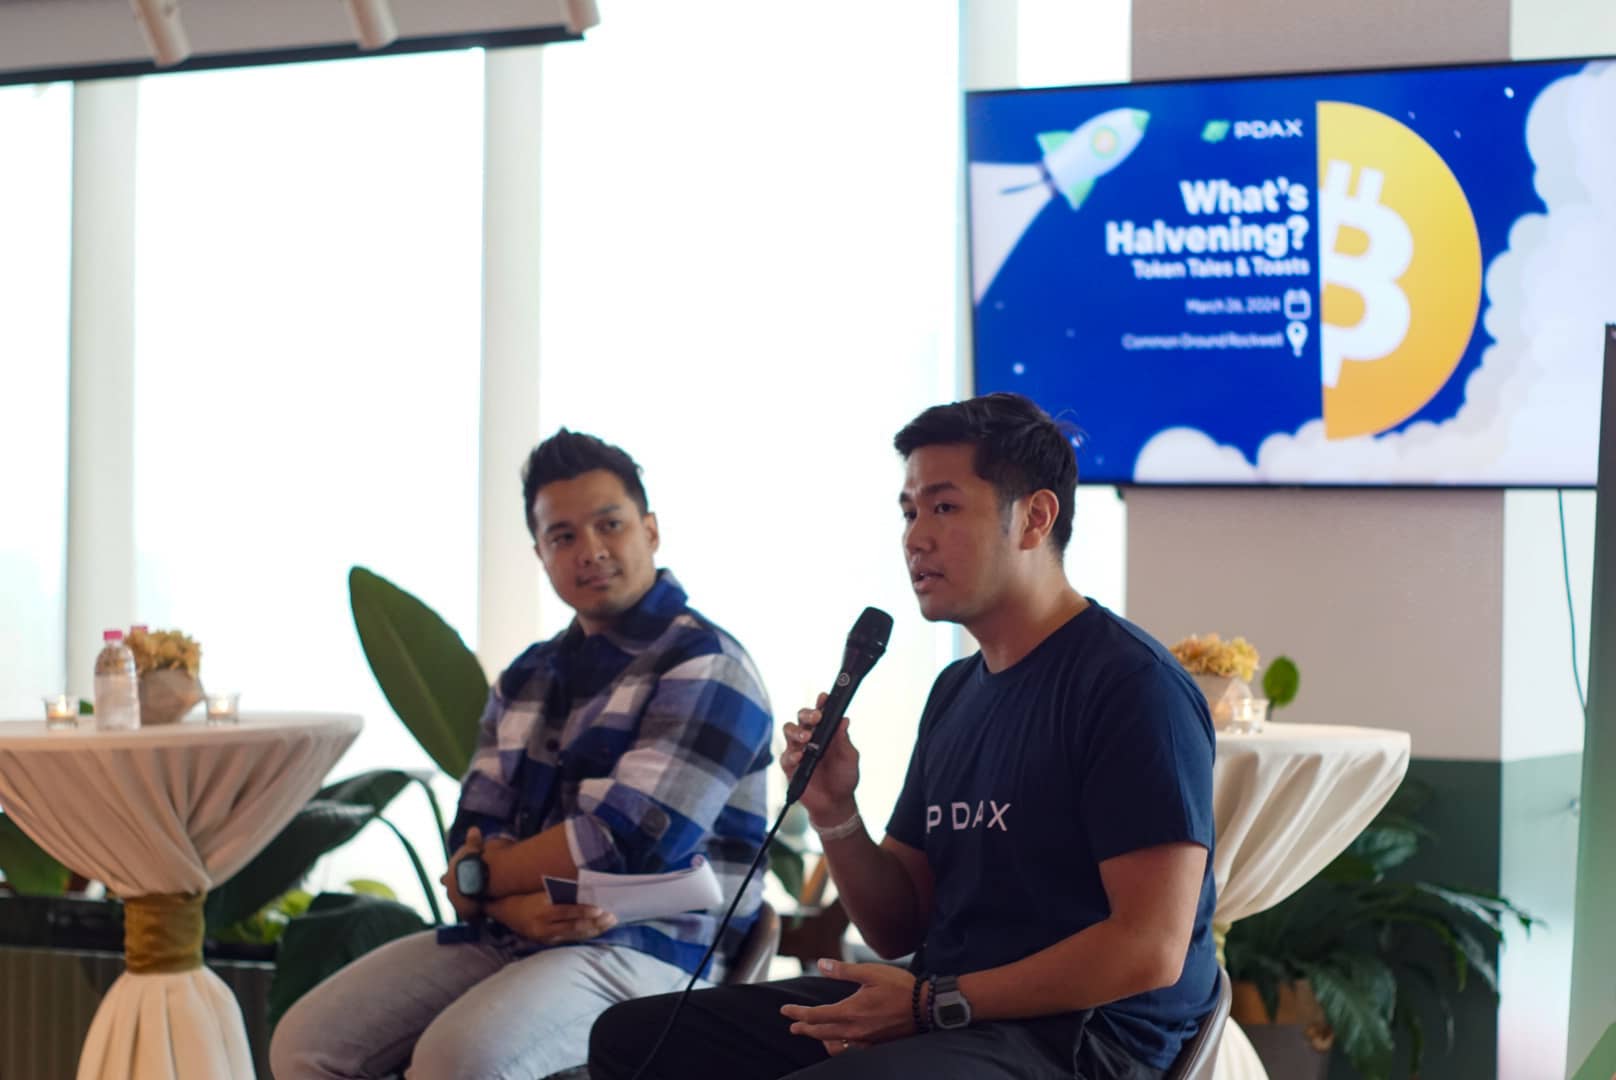 Vincent Tio, Head of Platform Solutions for PDAX, speaking during the What's Halvening AMA